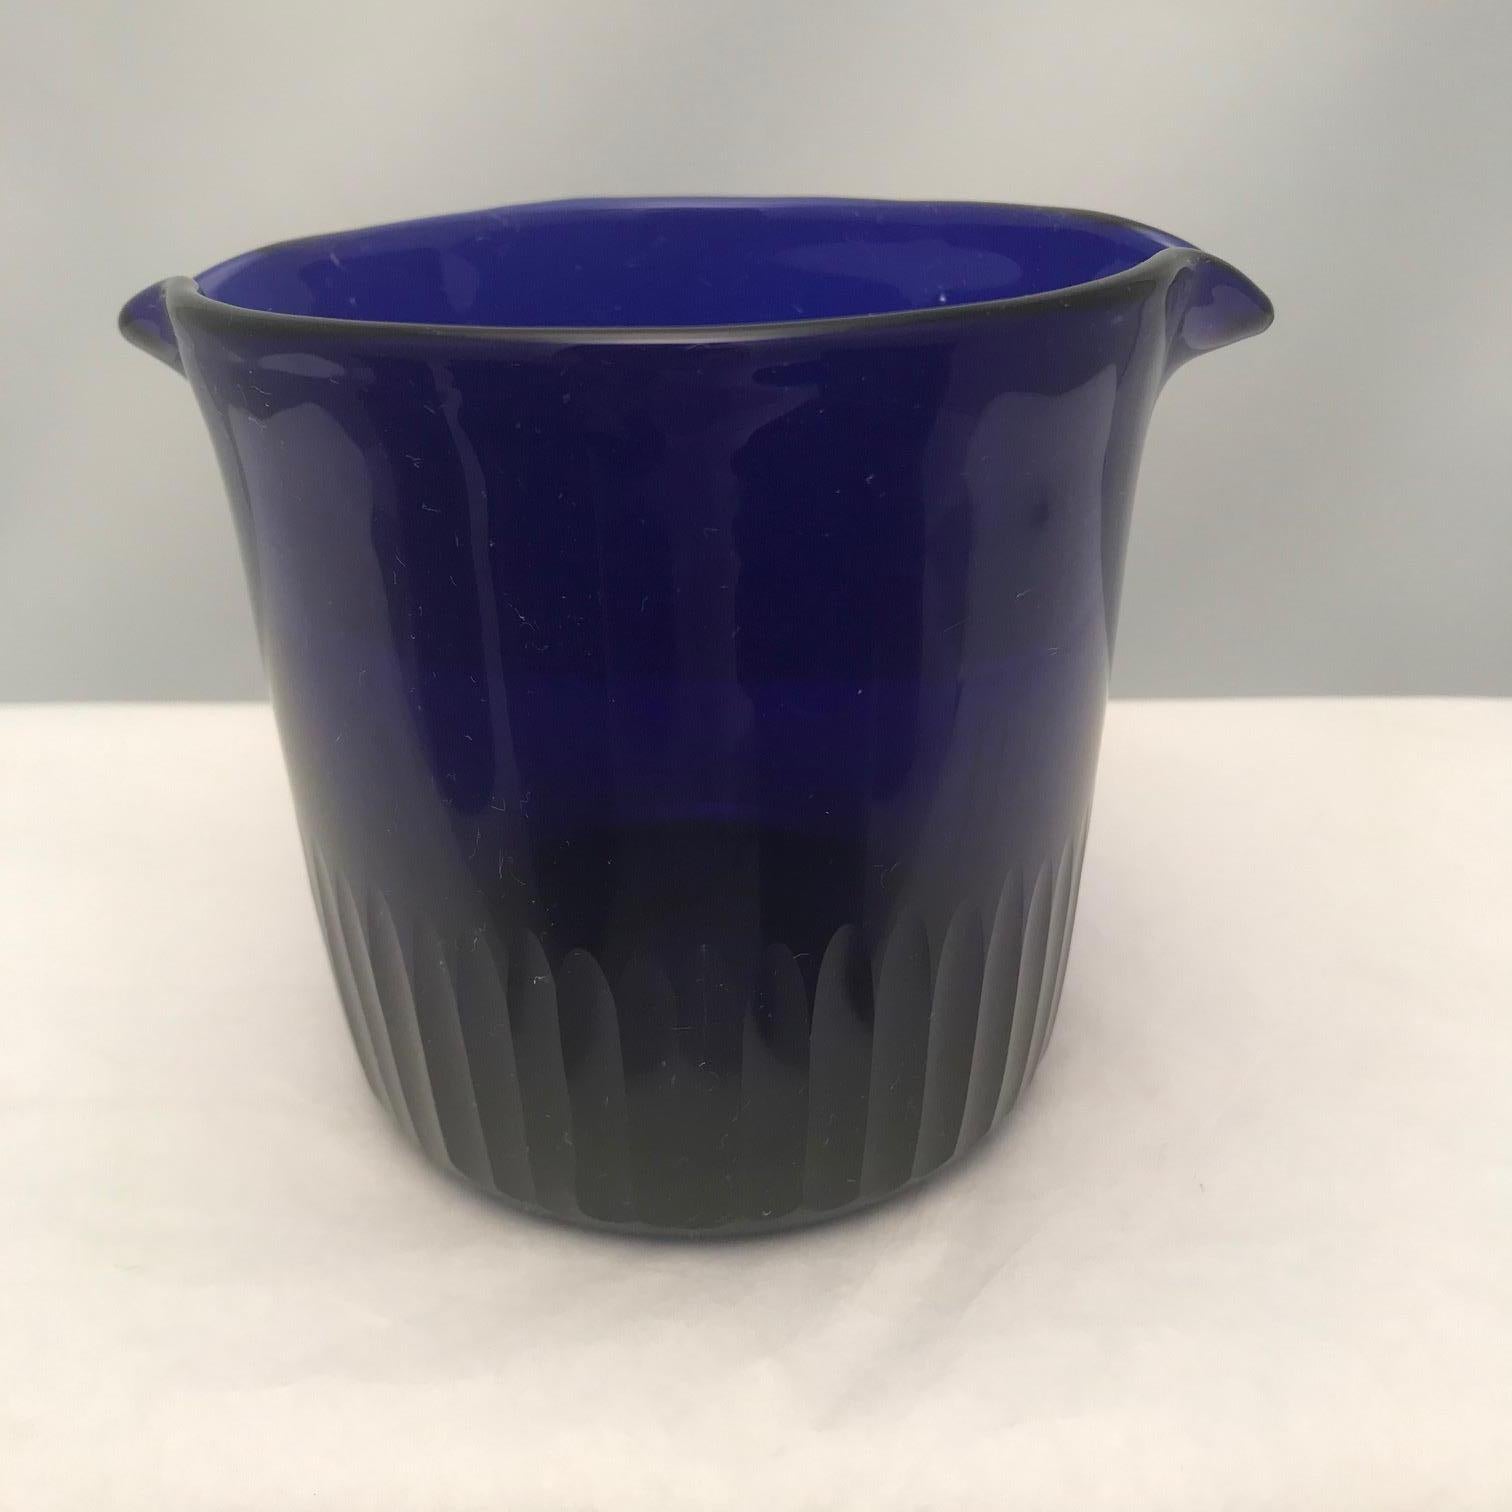 Hand blown and double-lipped, this set is also cut with vertical blazes for added elegance. The deep cobalt is most desirable and contributes a dash of color and sophisticated style to your dining room.